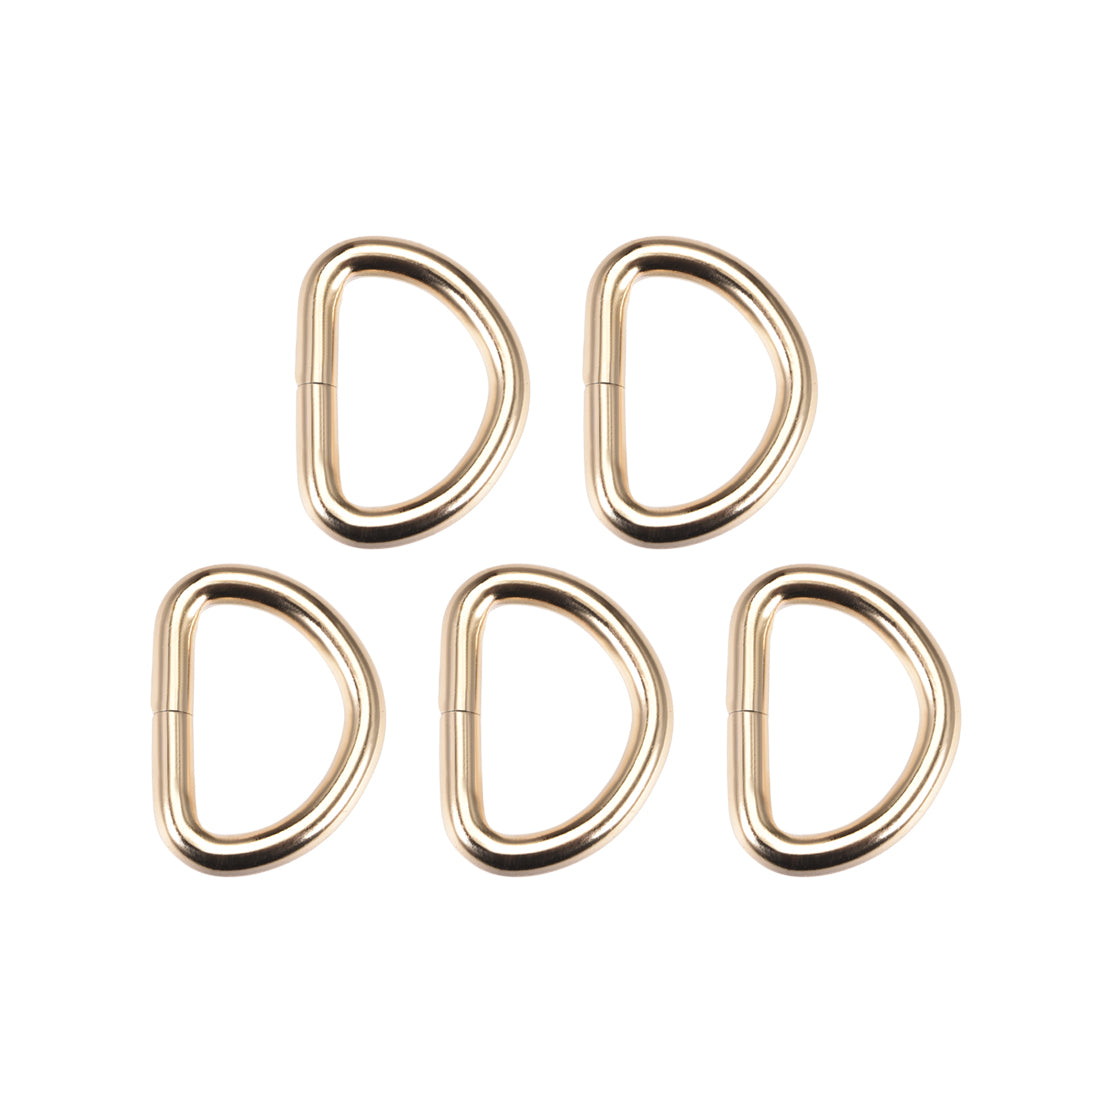 uxcell Uxcell 5 Pcs D Ring Buckle 1 Inch Metal Semi-Circular D-Rings Gold Tone for Hardware Bags Belts Craft DIY Accessories